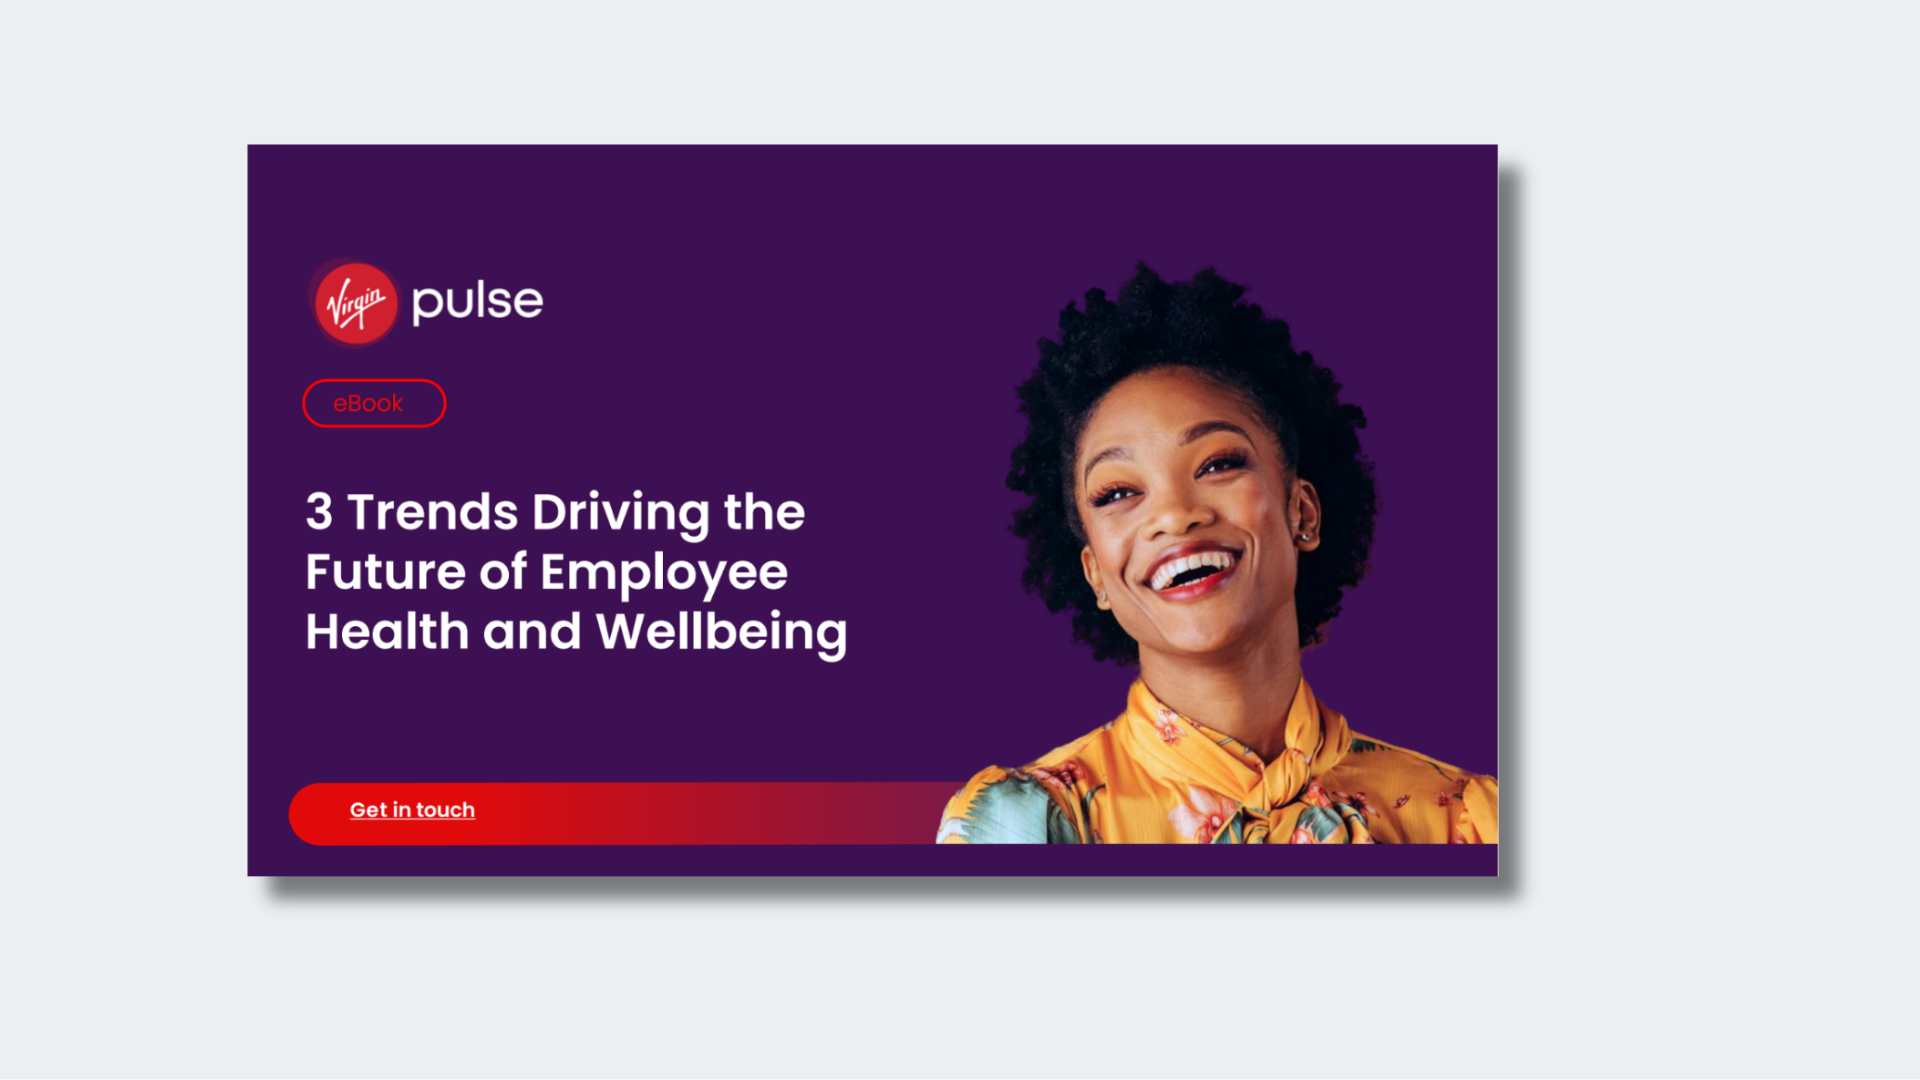 3 Trends Driving the Future of Employee Health and Wellbeing